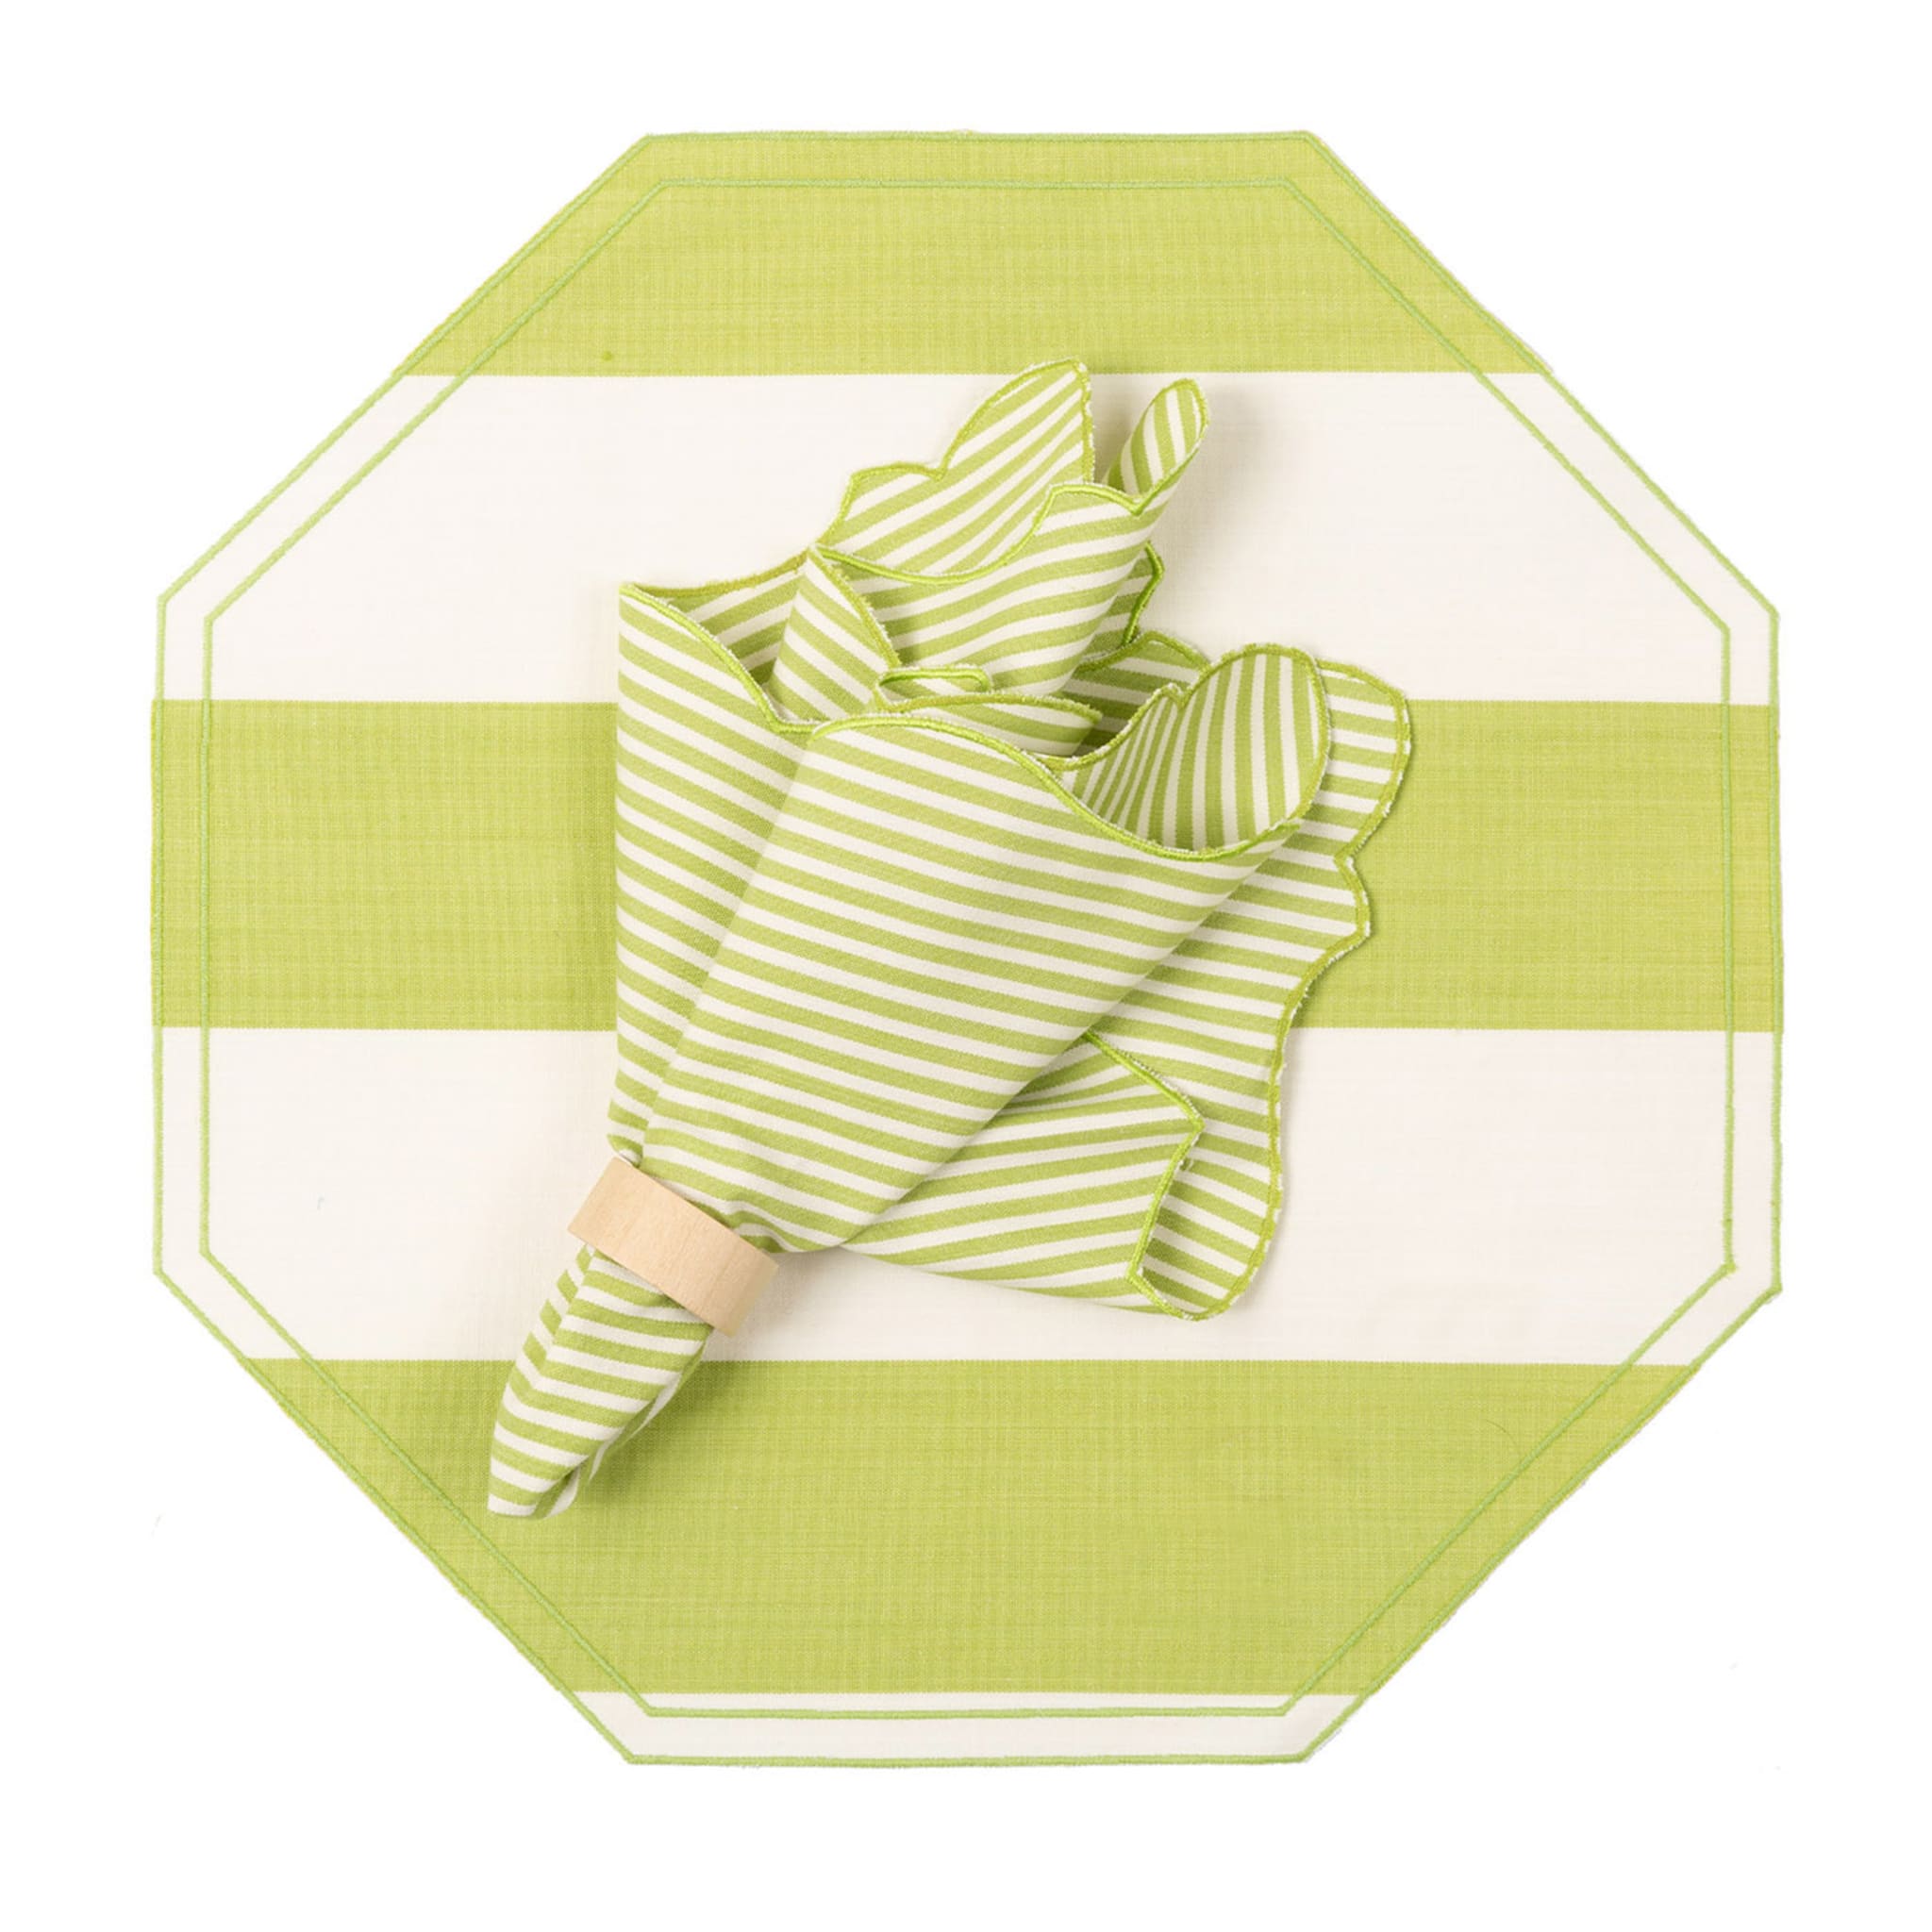 Mr Stripes Green Octagon Placemat & Angelina Napkin #1 - Main view